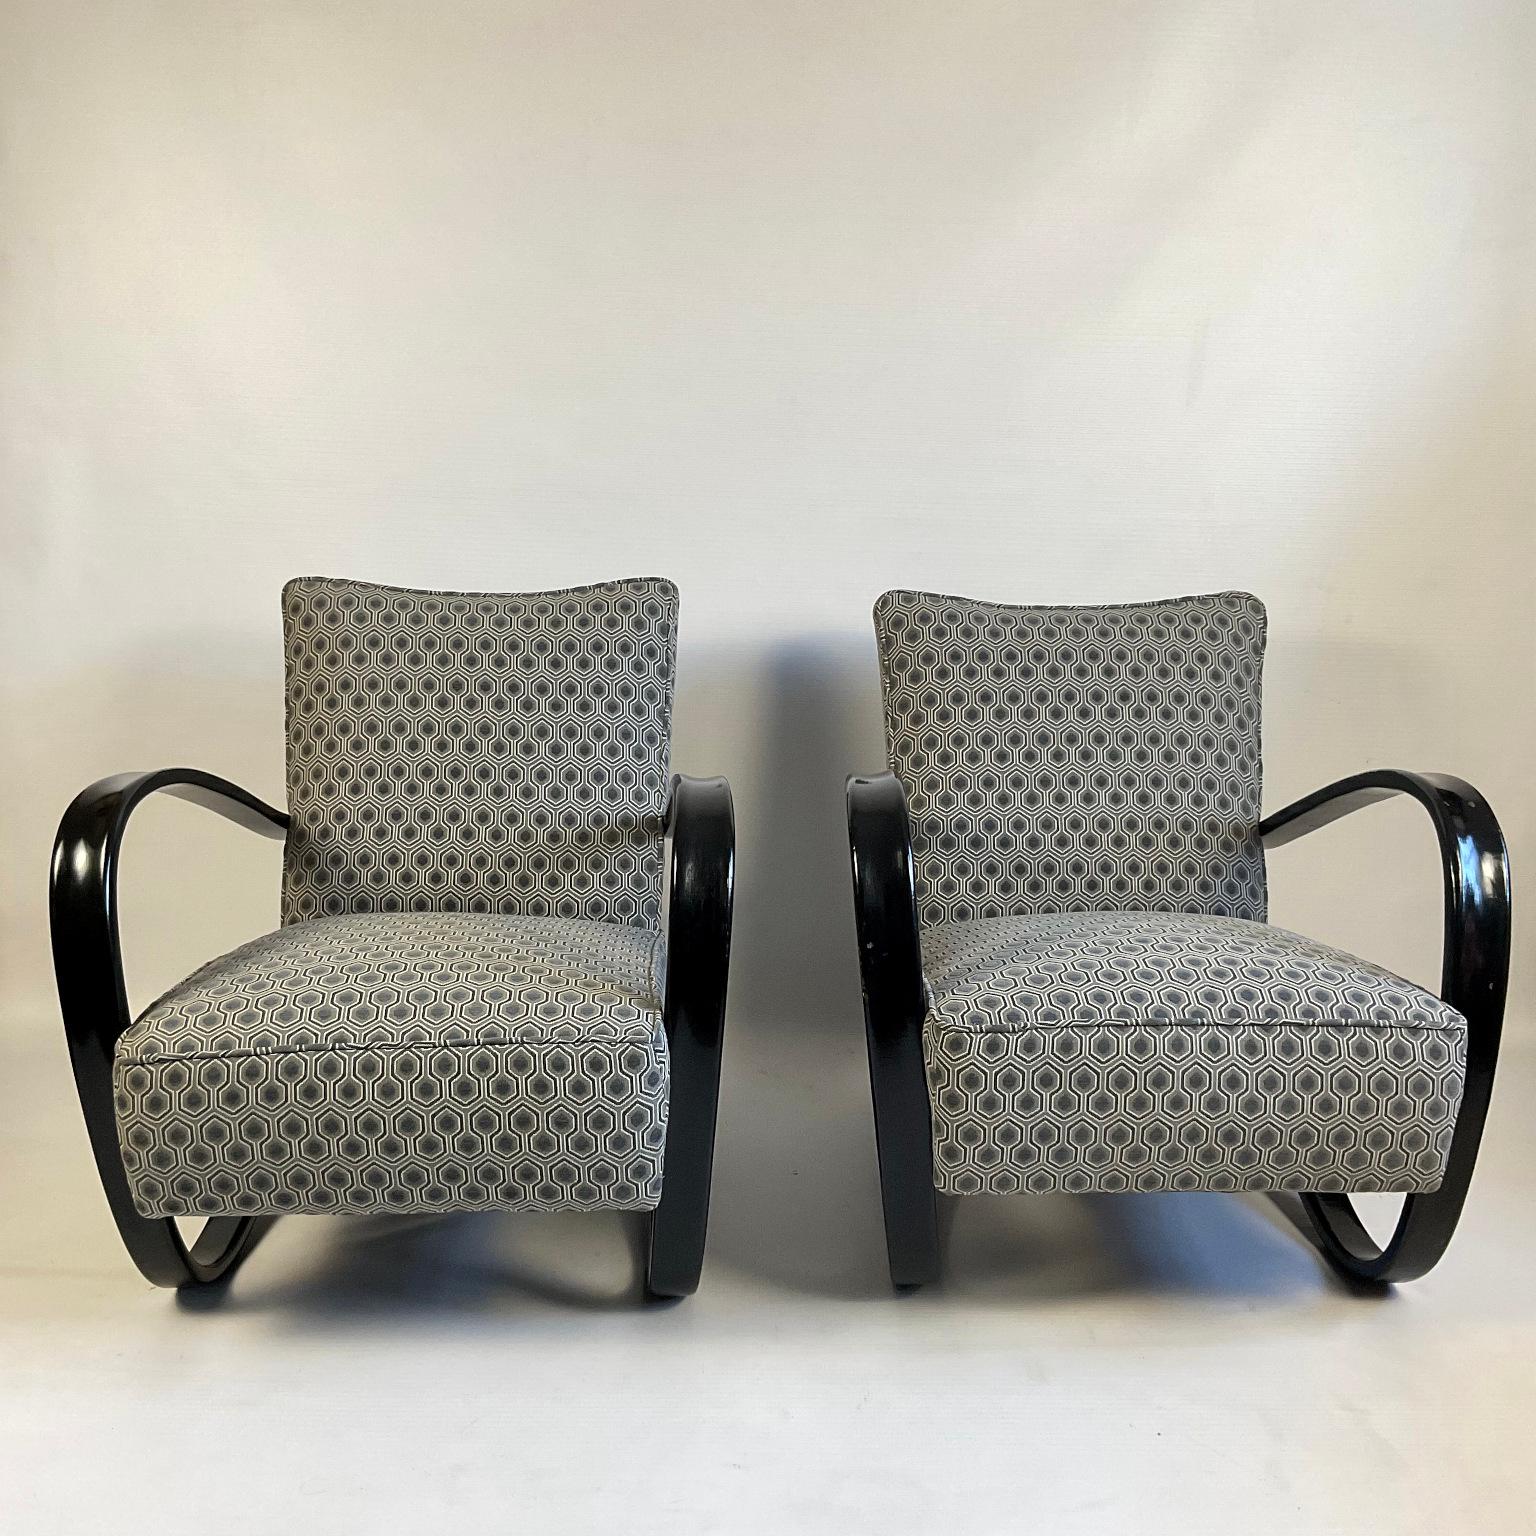 Pair of Original and Authentic Lounge Armchairs model 